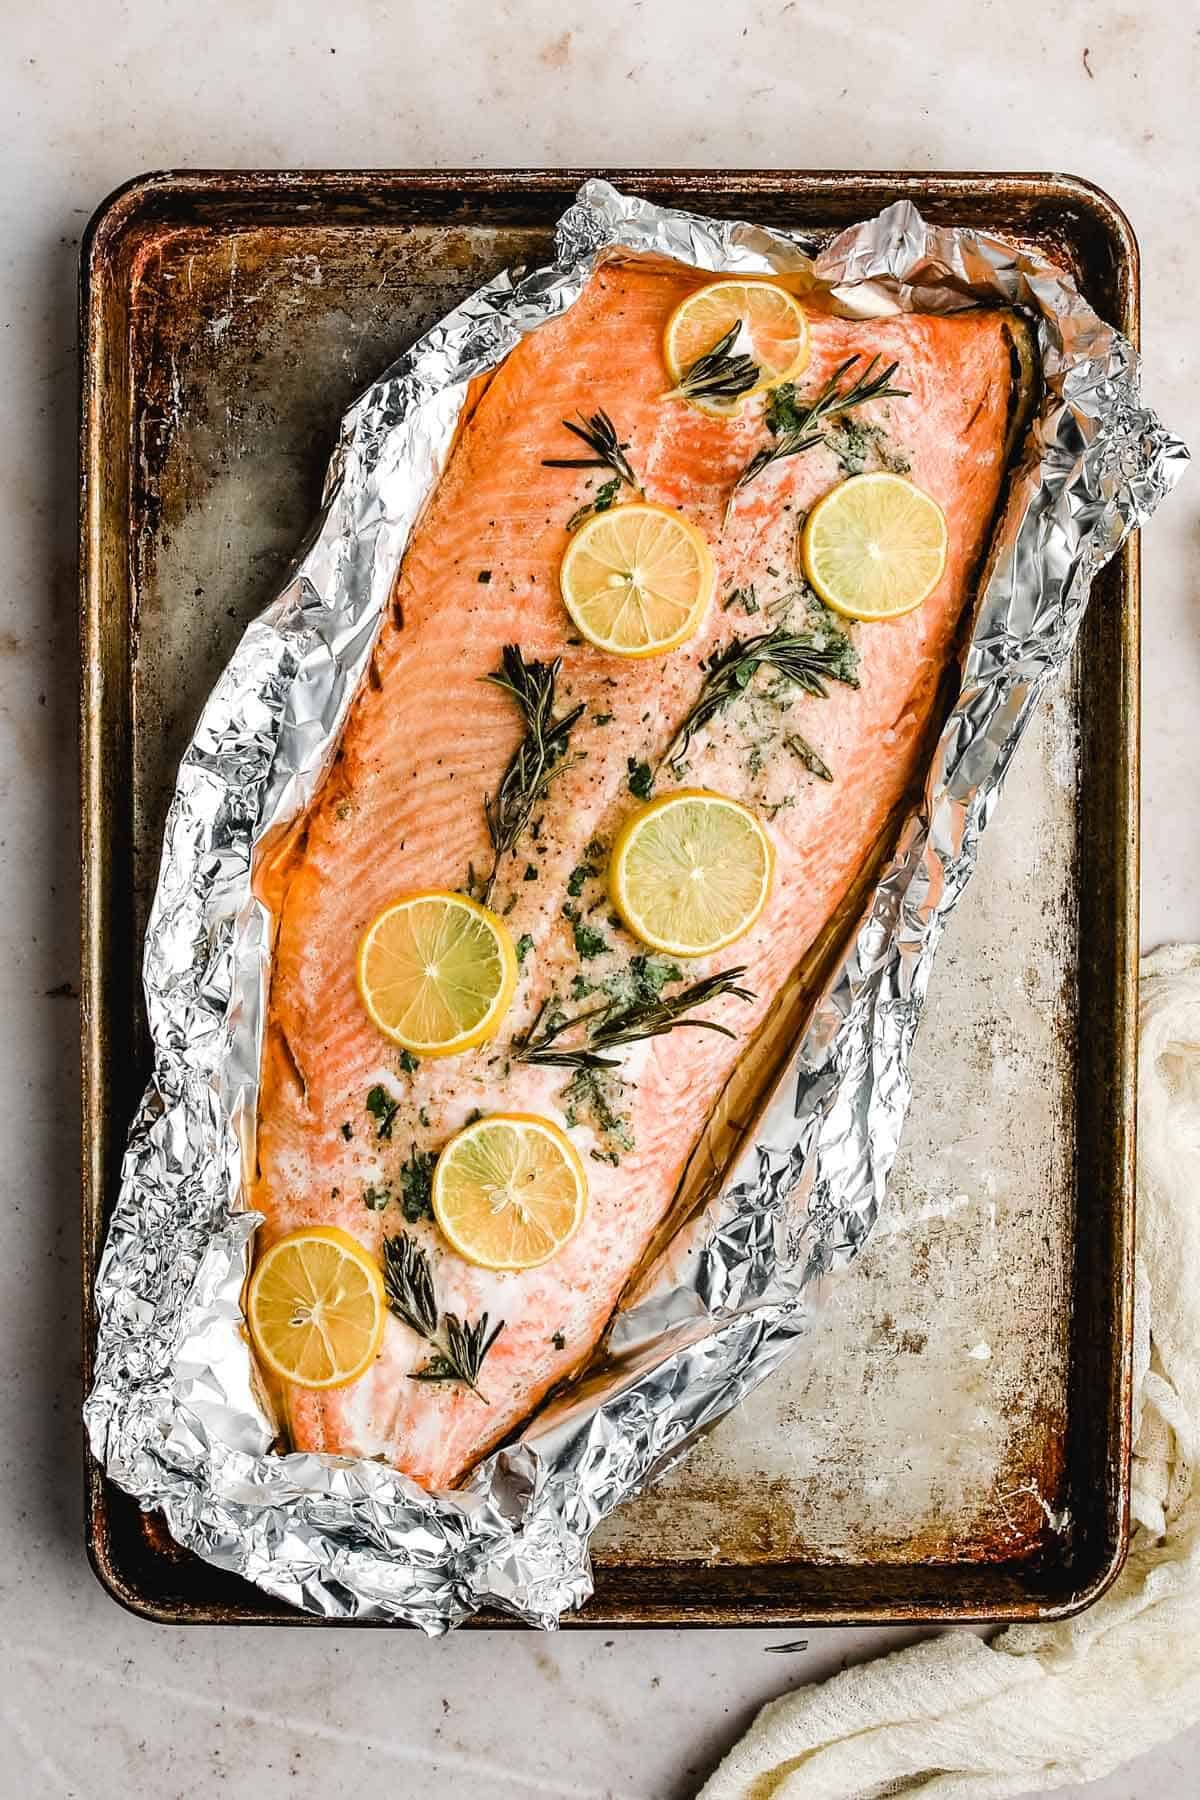 an over head view of a baking sheet with a whole salmon fillet wrapped in foil with fresh rosemary and lemon slices on top